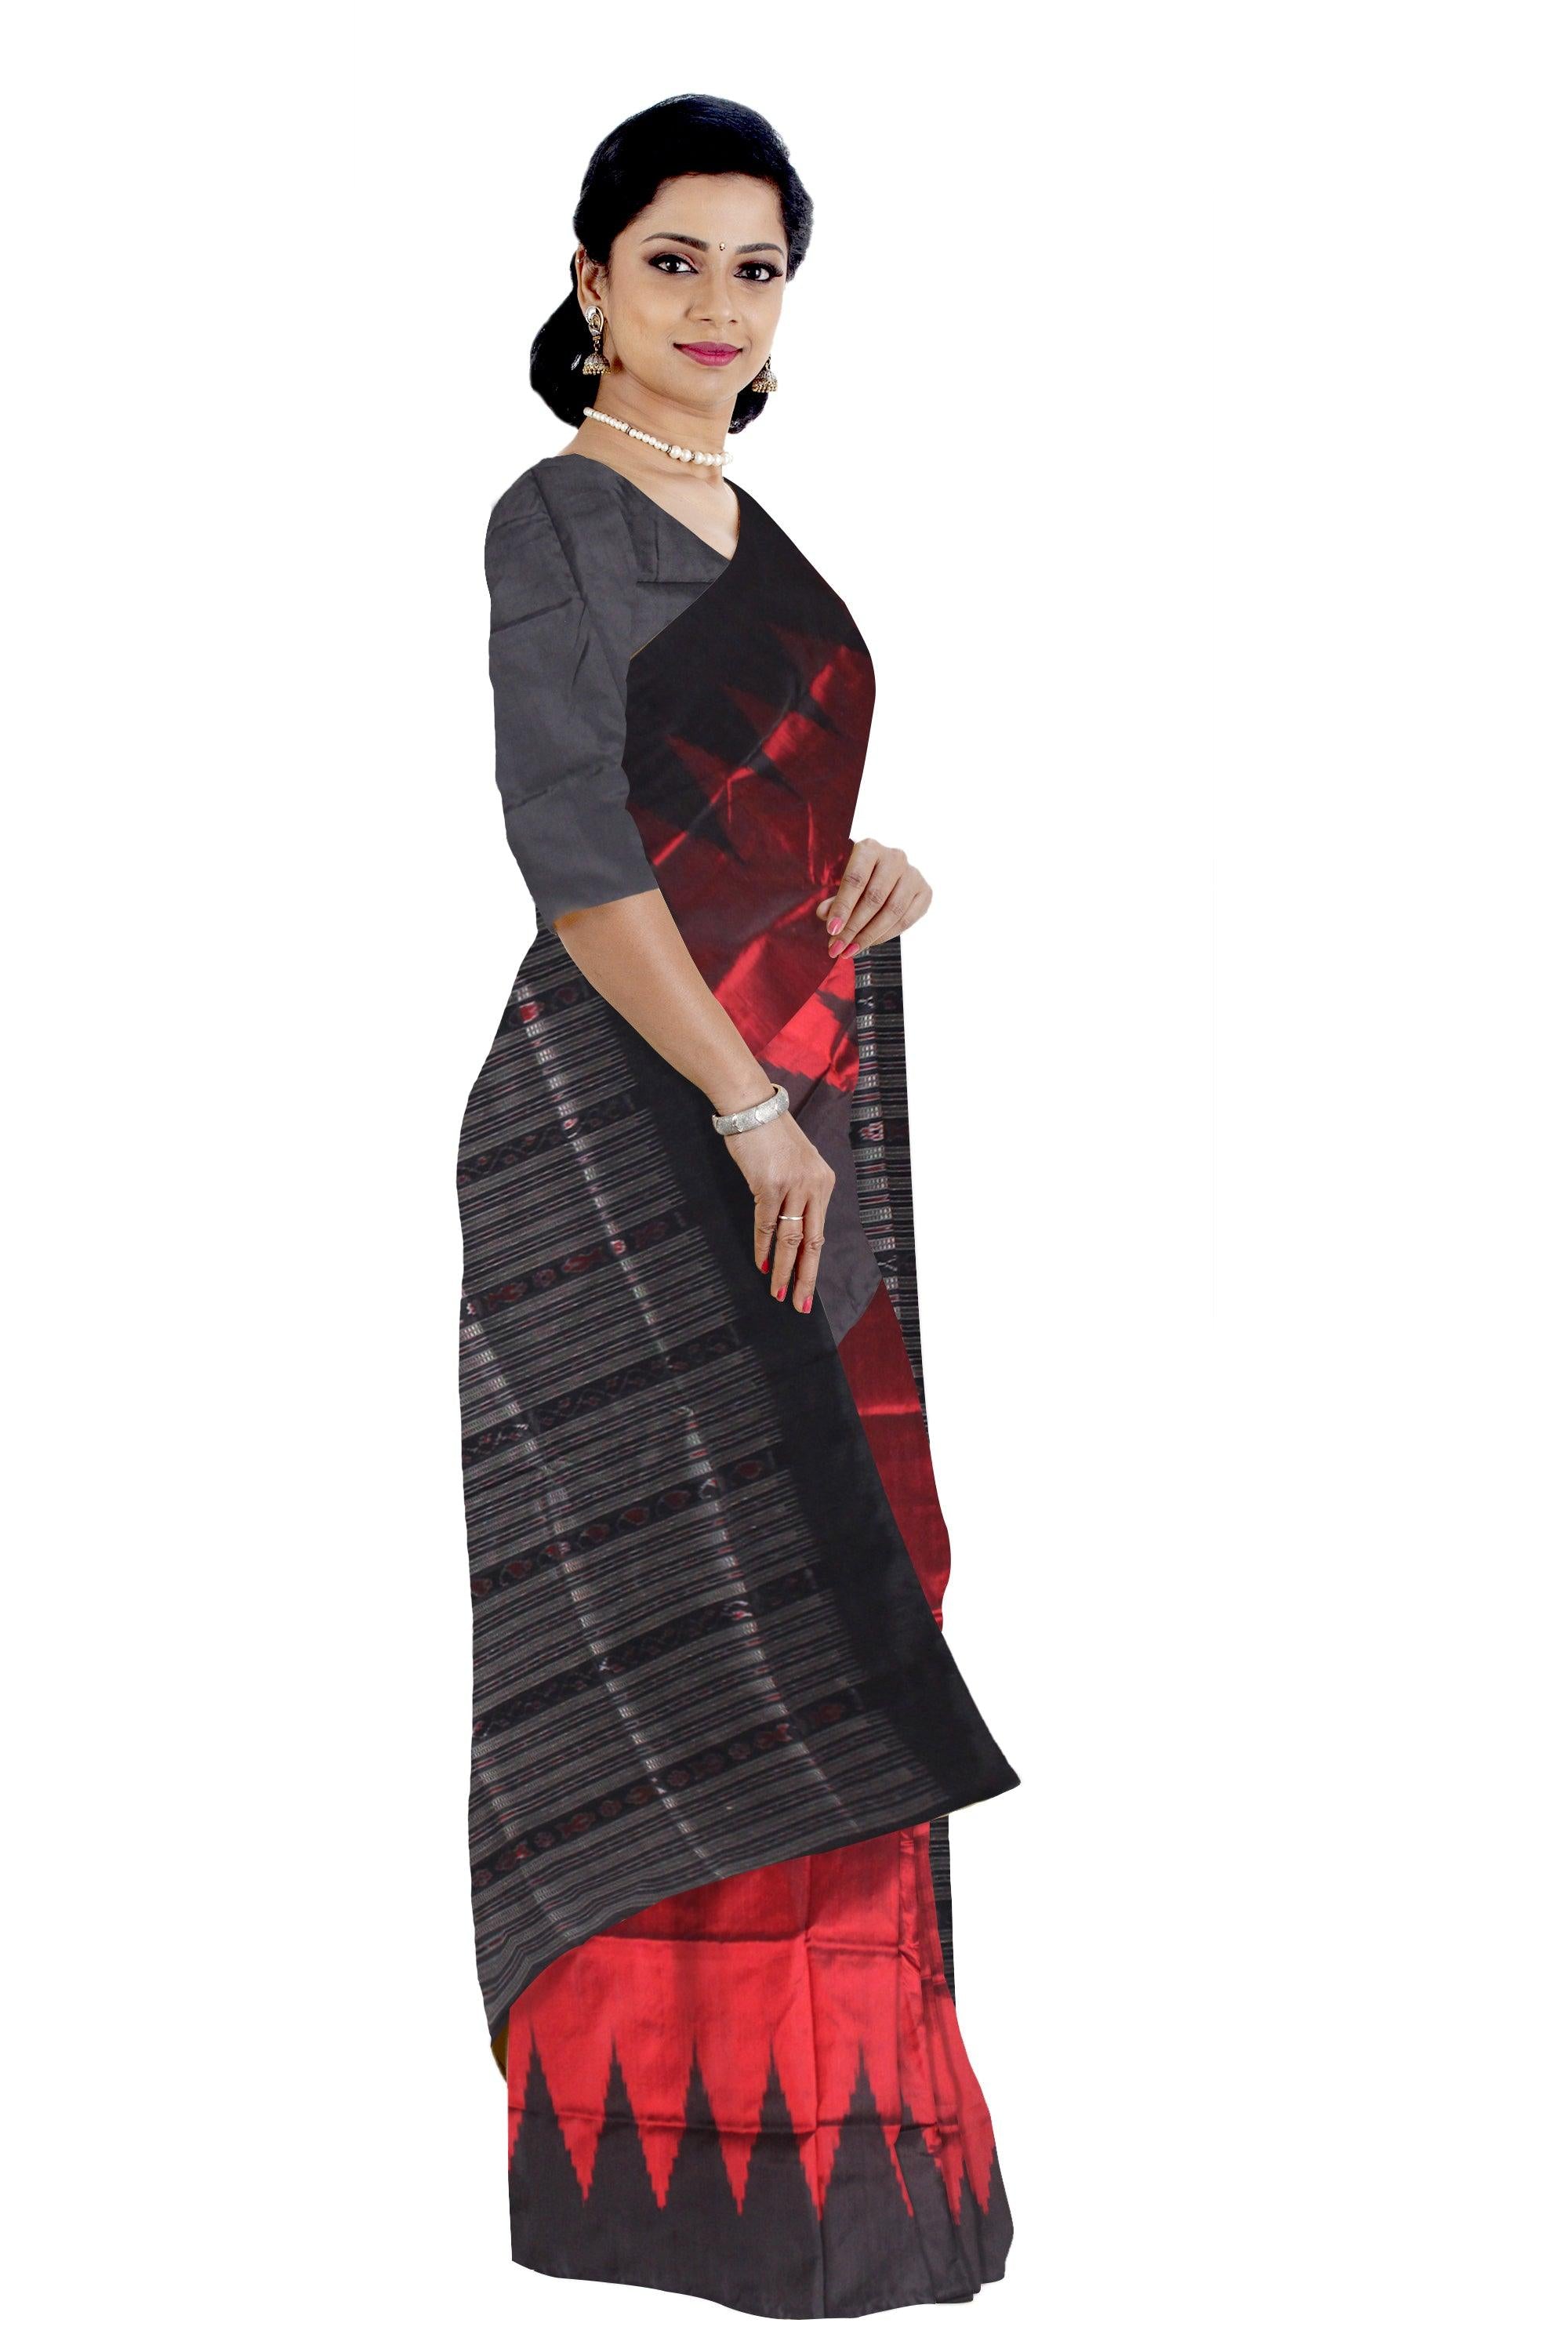 Modern Look MIx PATA SAREE IN MAROON Color in PLAIN DESIGN WITH BLOUSe PIECE. - Koshali Arts & Crafts Enterprise